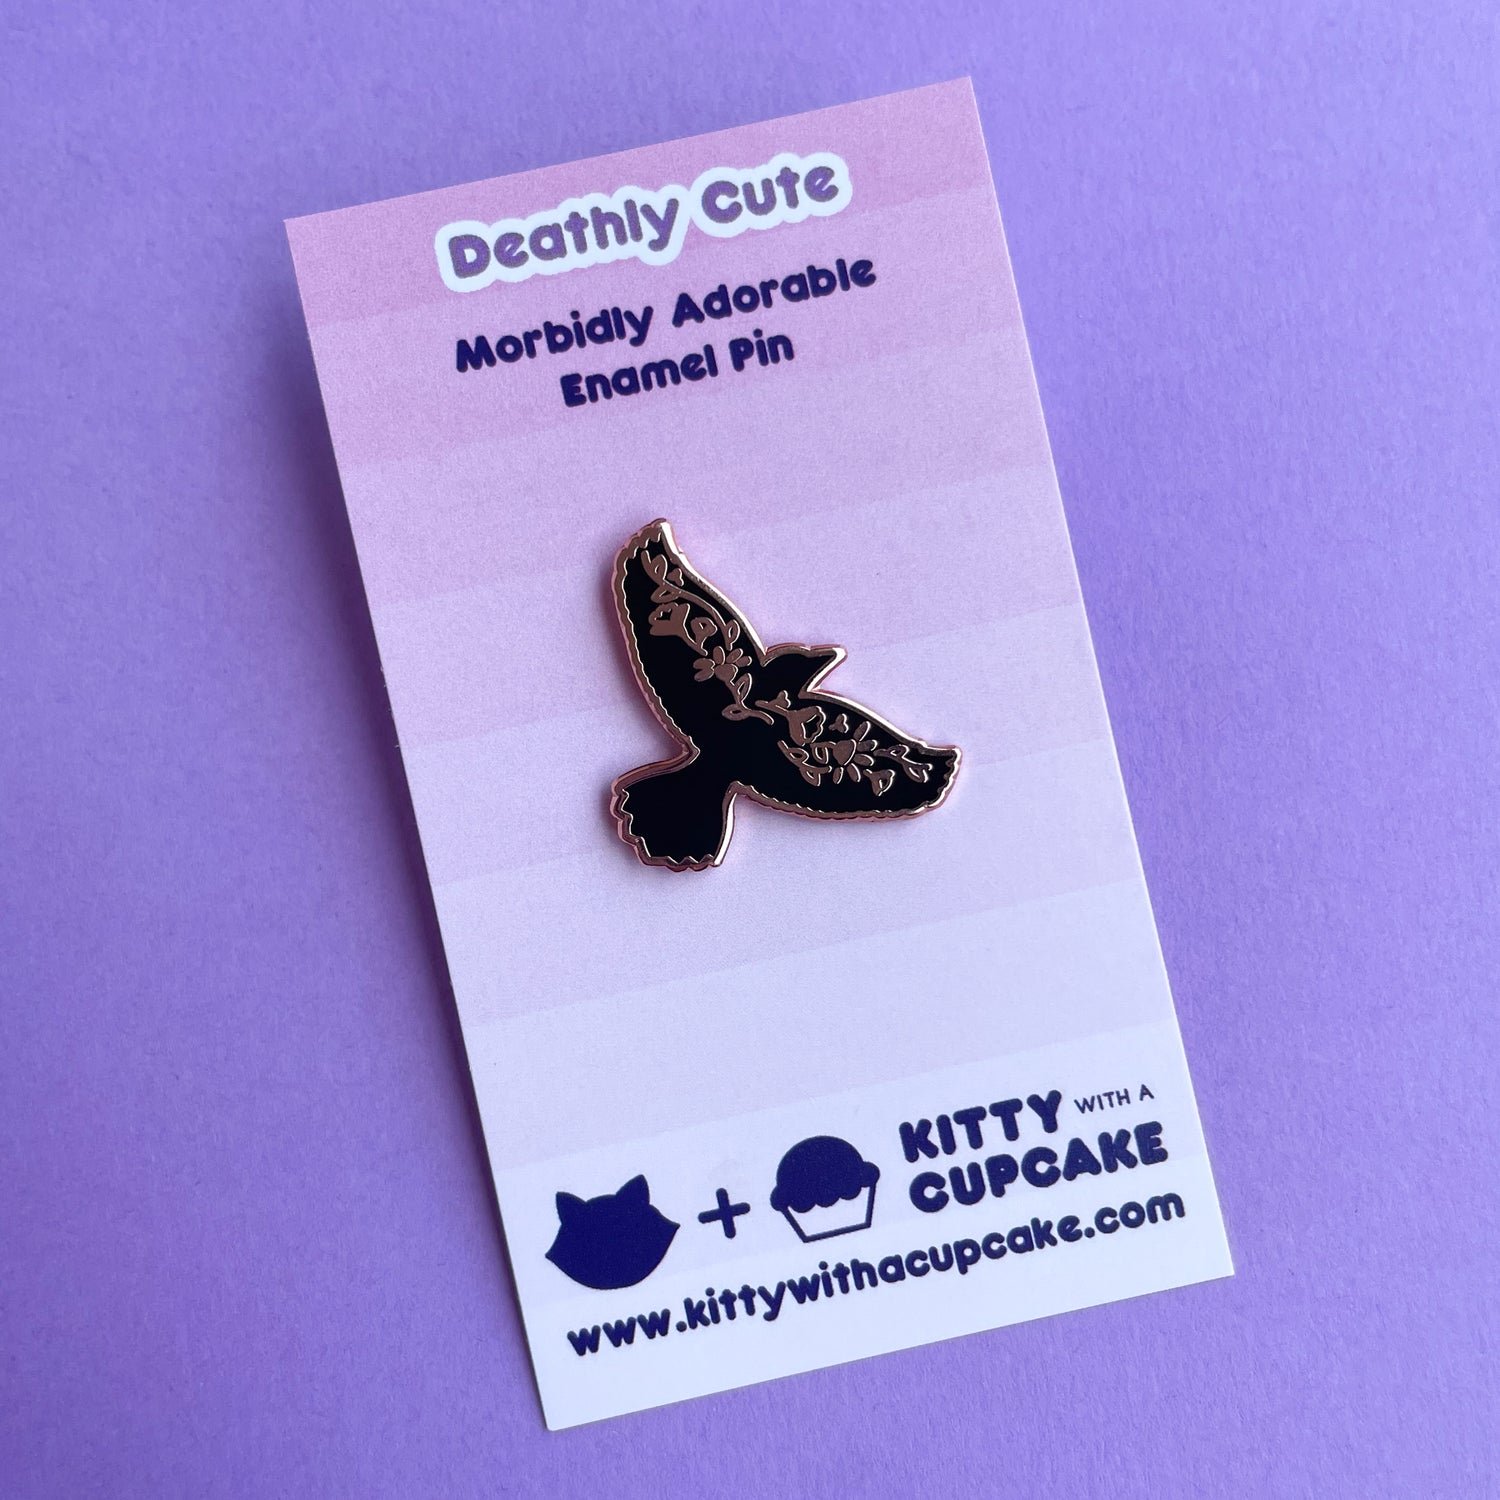 An enamel pin shaped like the silhouette of a raven with its wingspread on a pink card.